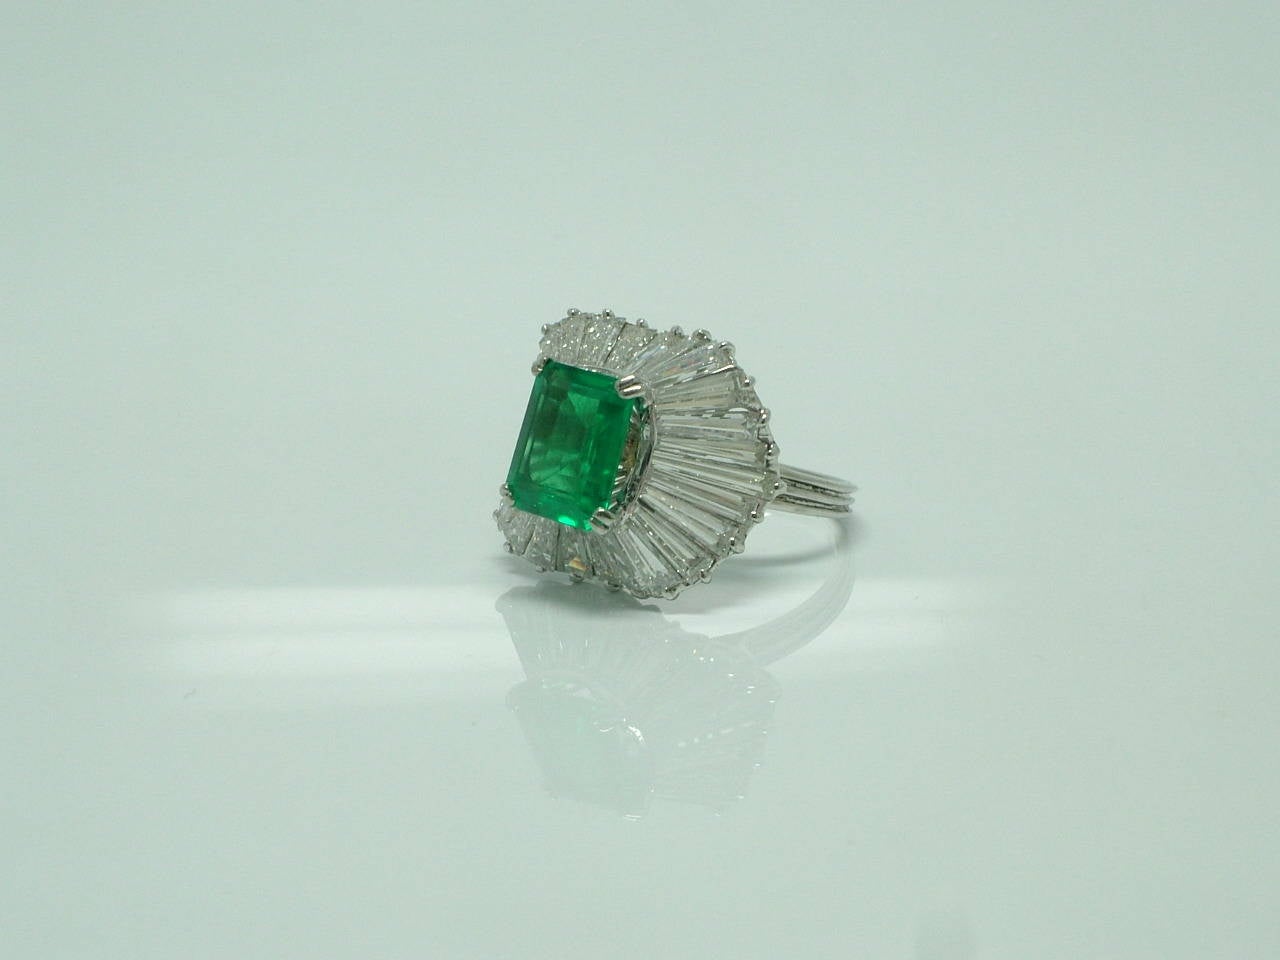 The emerald-cut colombian emerald weighing approx. 2.20ct to the tapered baguette-cut surround.
Accompanied by report dated 25 march 2015 from the Gem & Pearl Laboratory, London, stating that the emerald is of Colombian origin with evidence of